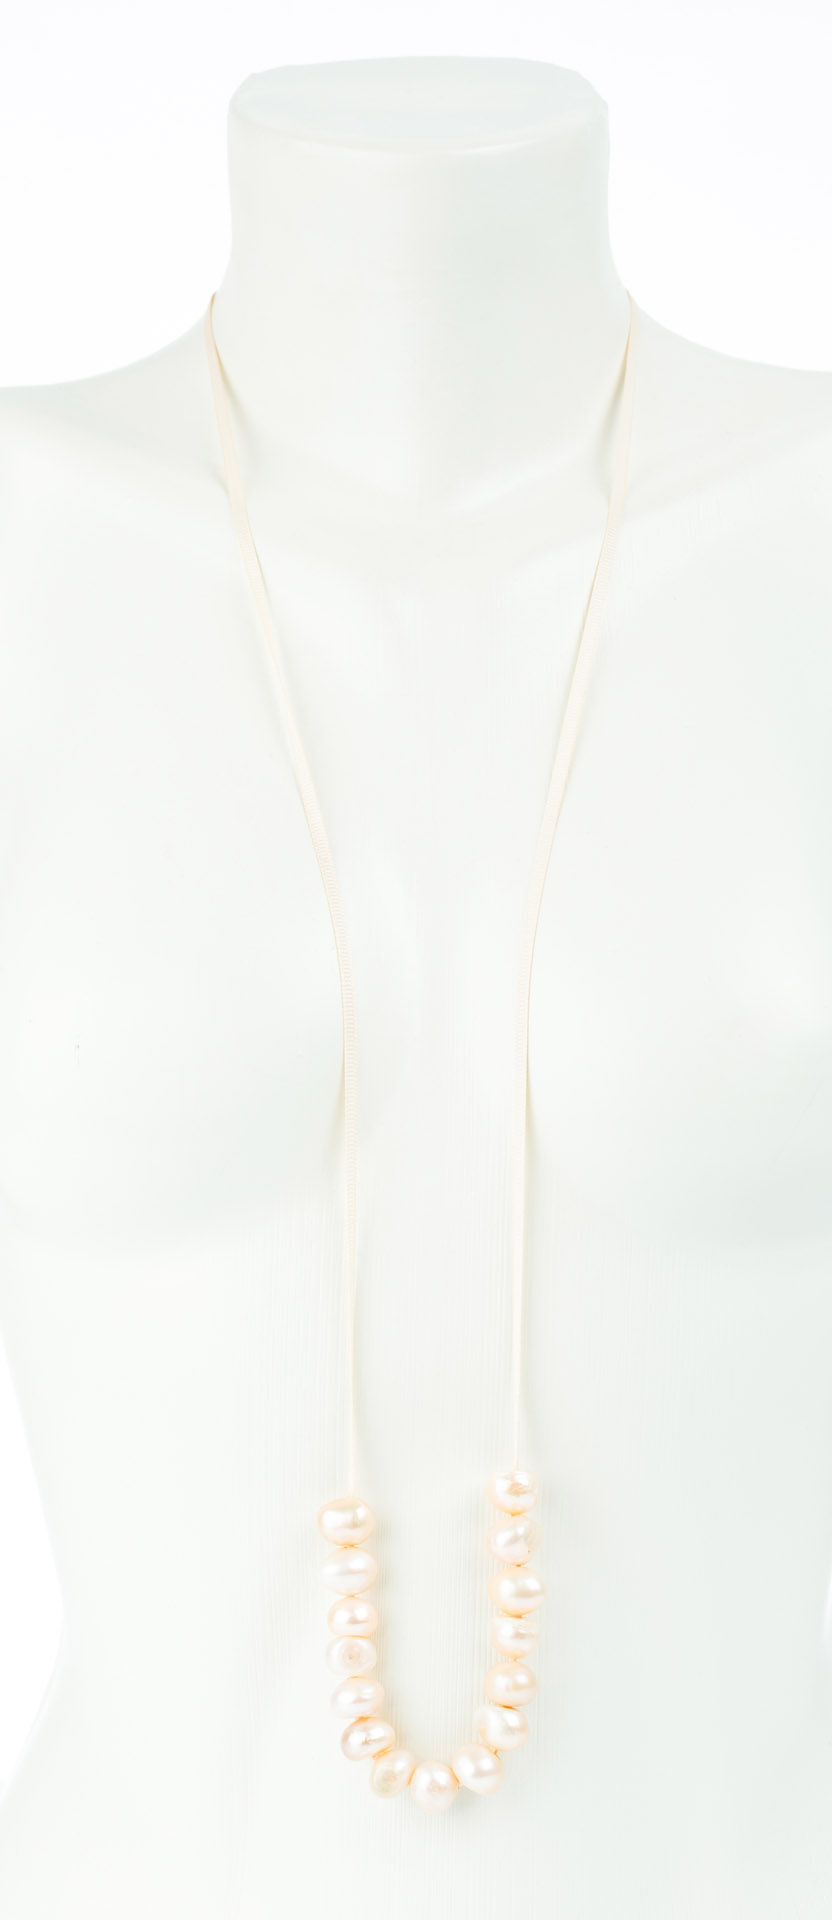 "Freshwater Pearls" long necklace with freshwater pearls and satin ribbon - salmon